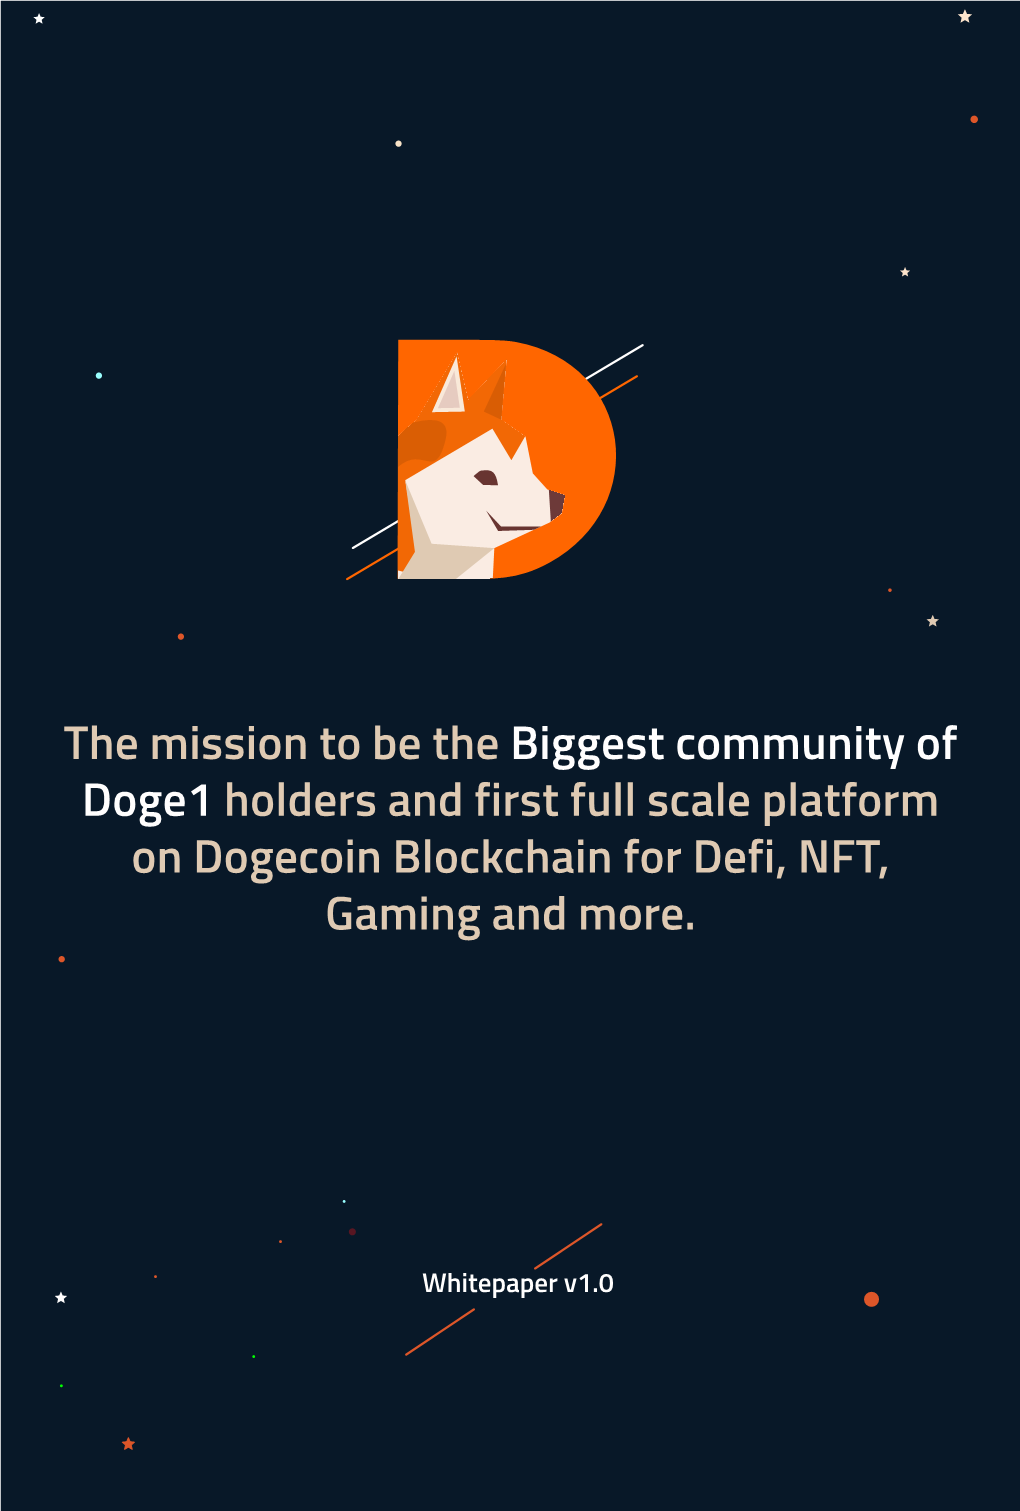 The Mission to Be the Biggest Community and Product on Dogecoin